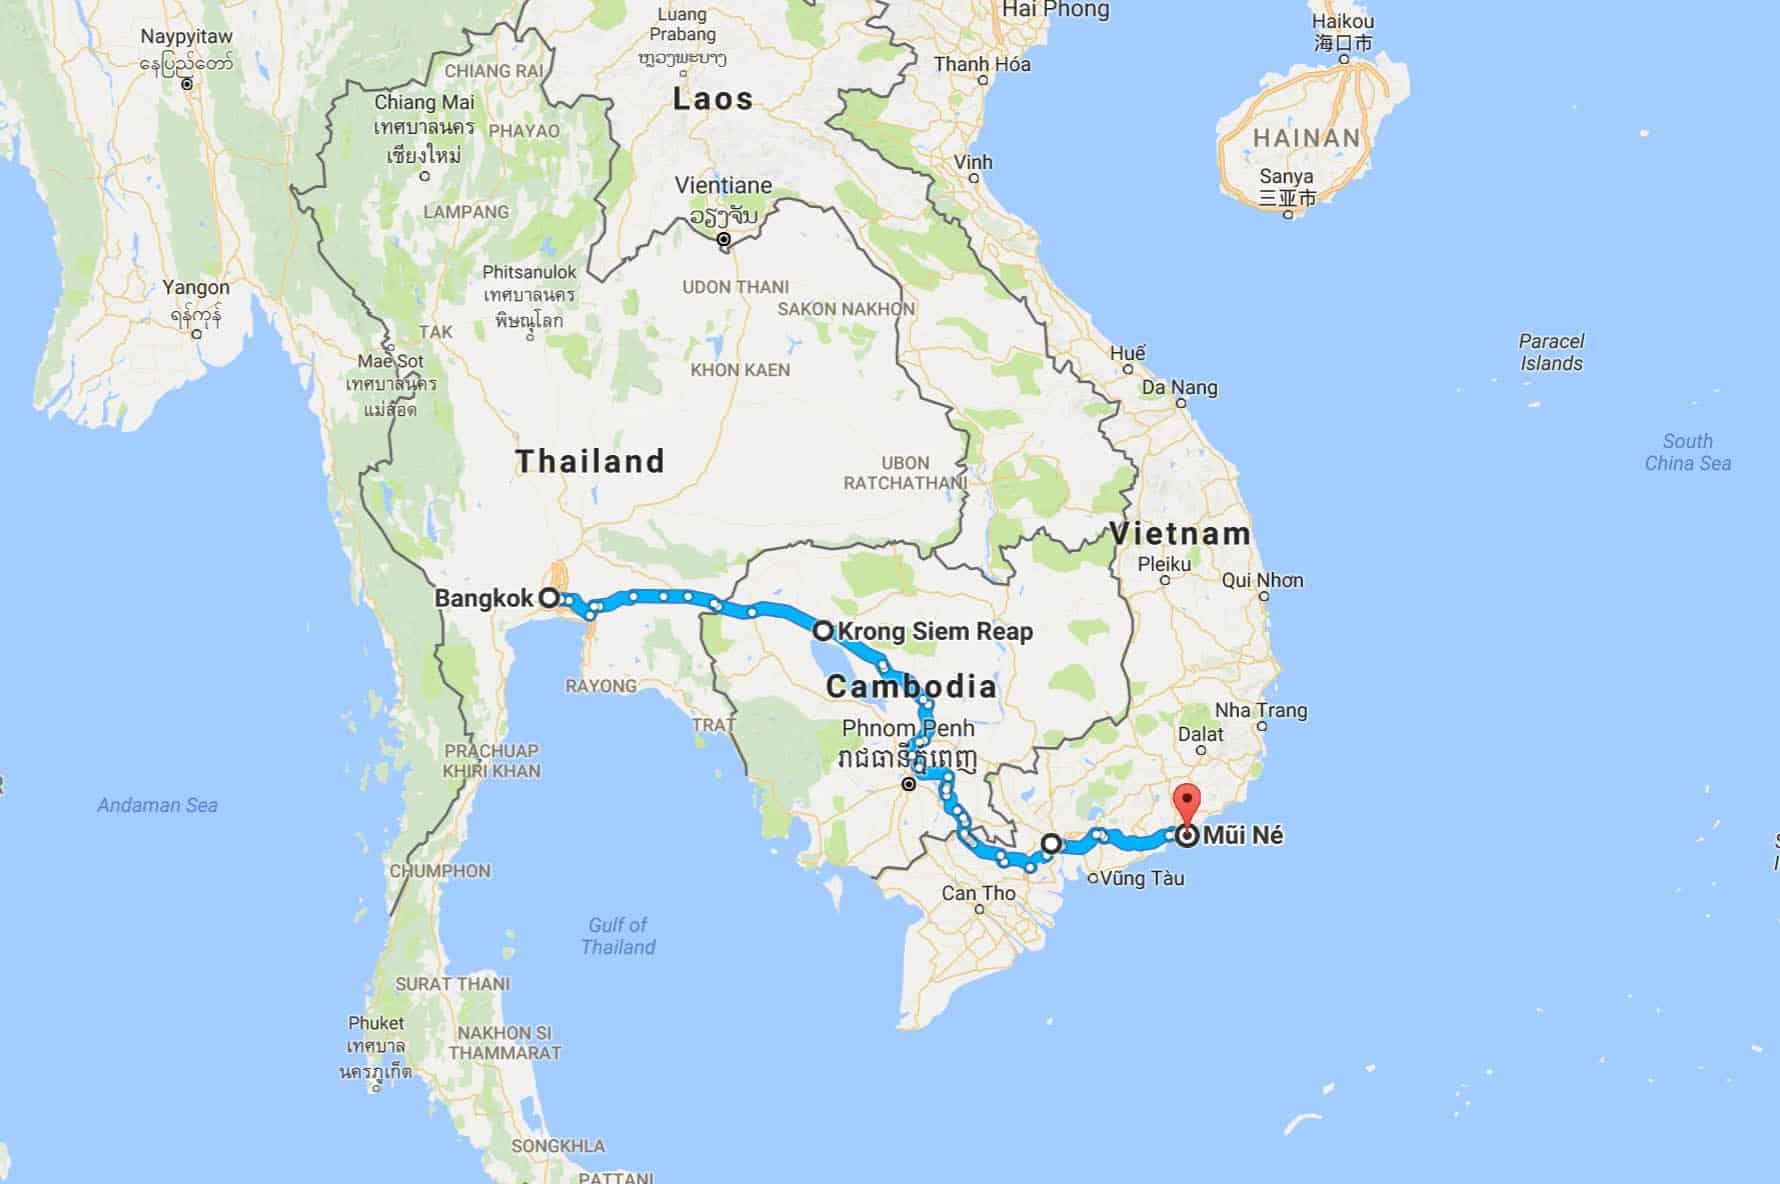 SOUTHEAST DIY Backpacking and Routes (2 Weeks) | The Poor Itinerary